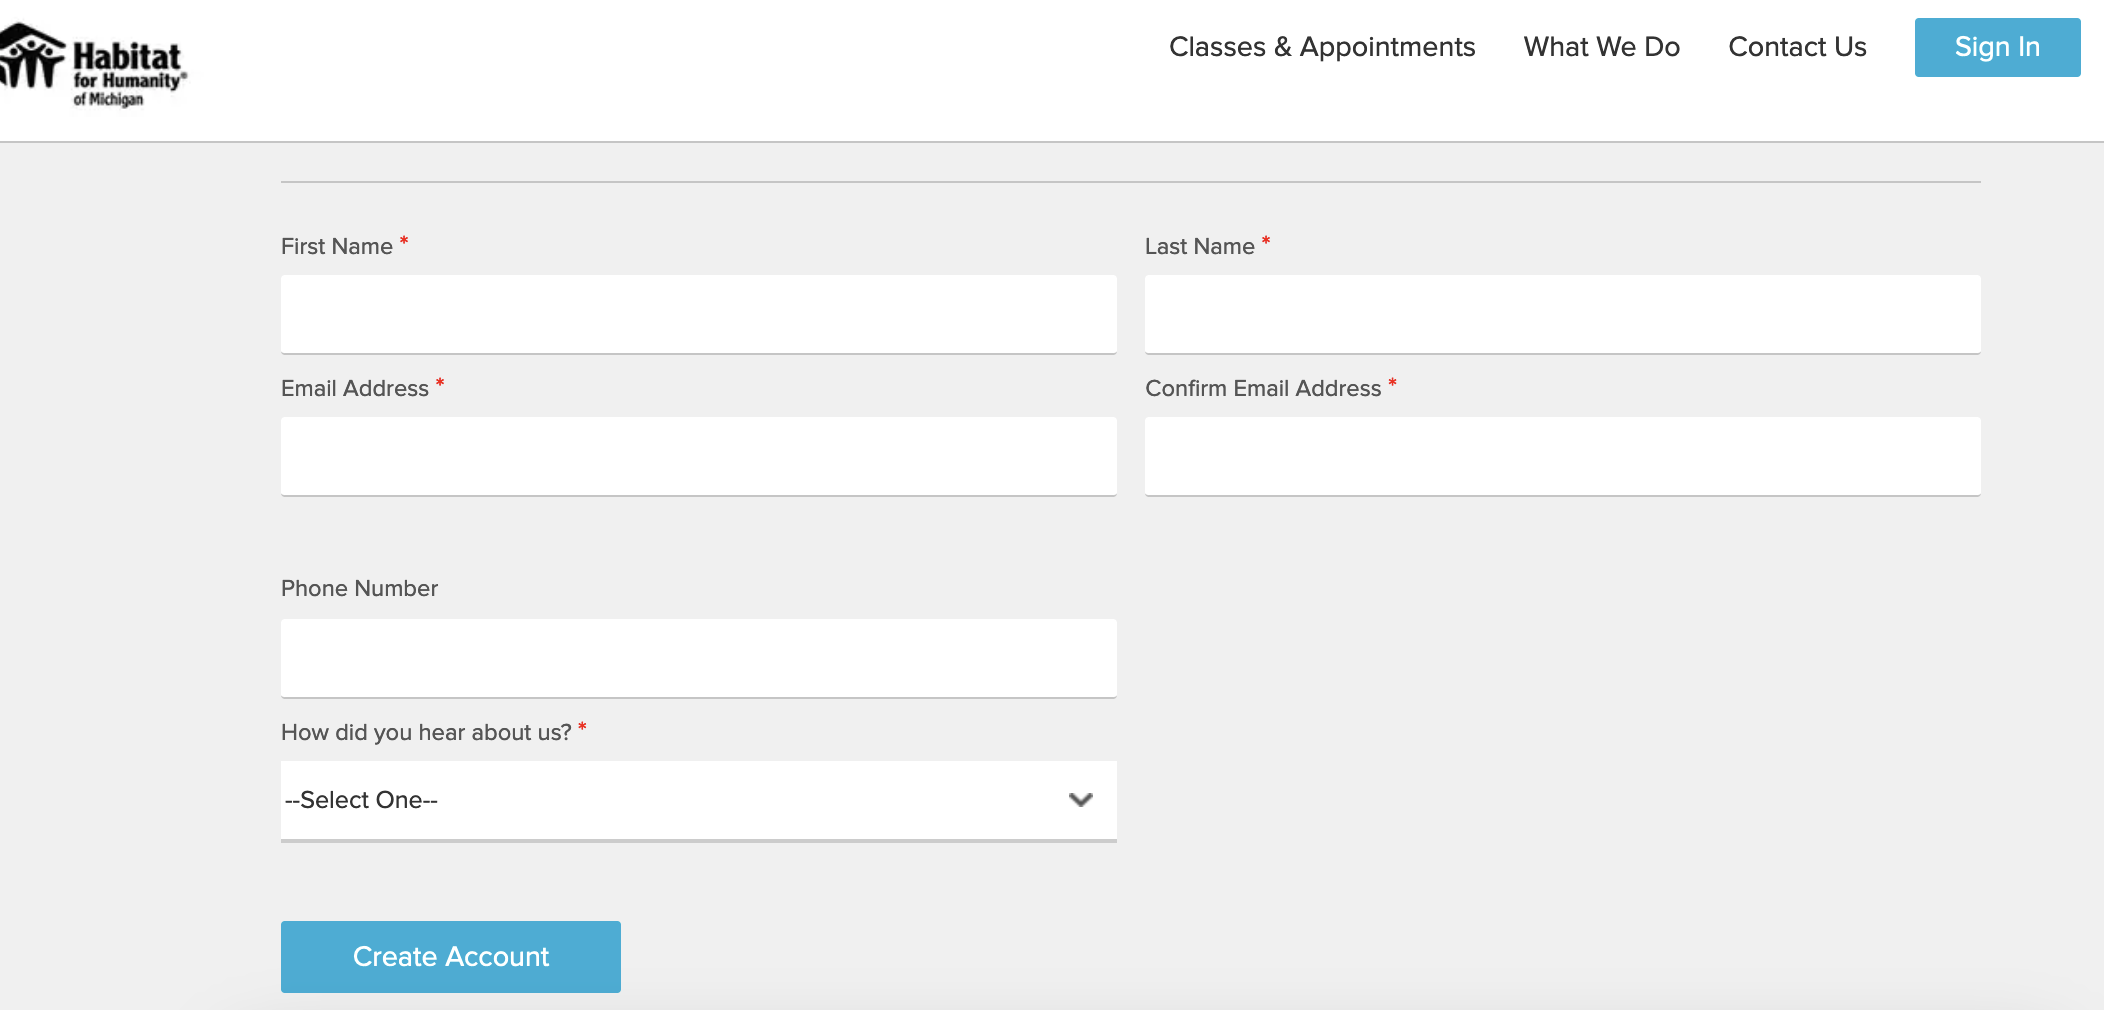 Account creation form for step two in sign-up process